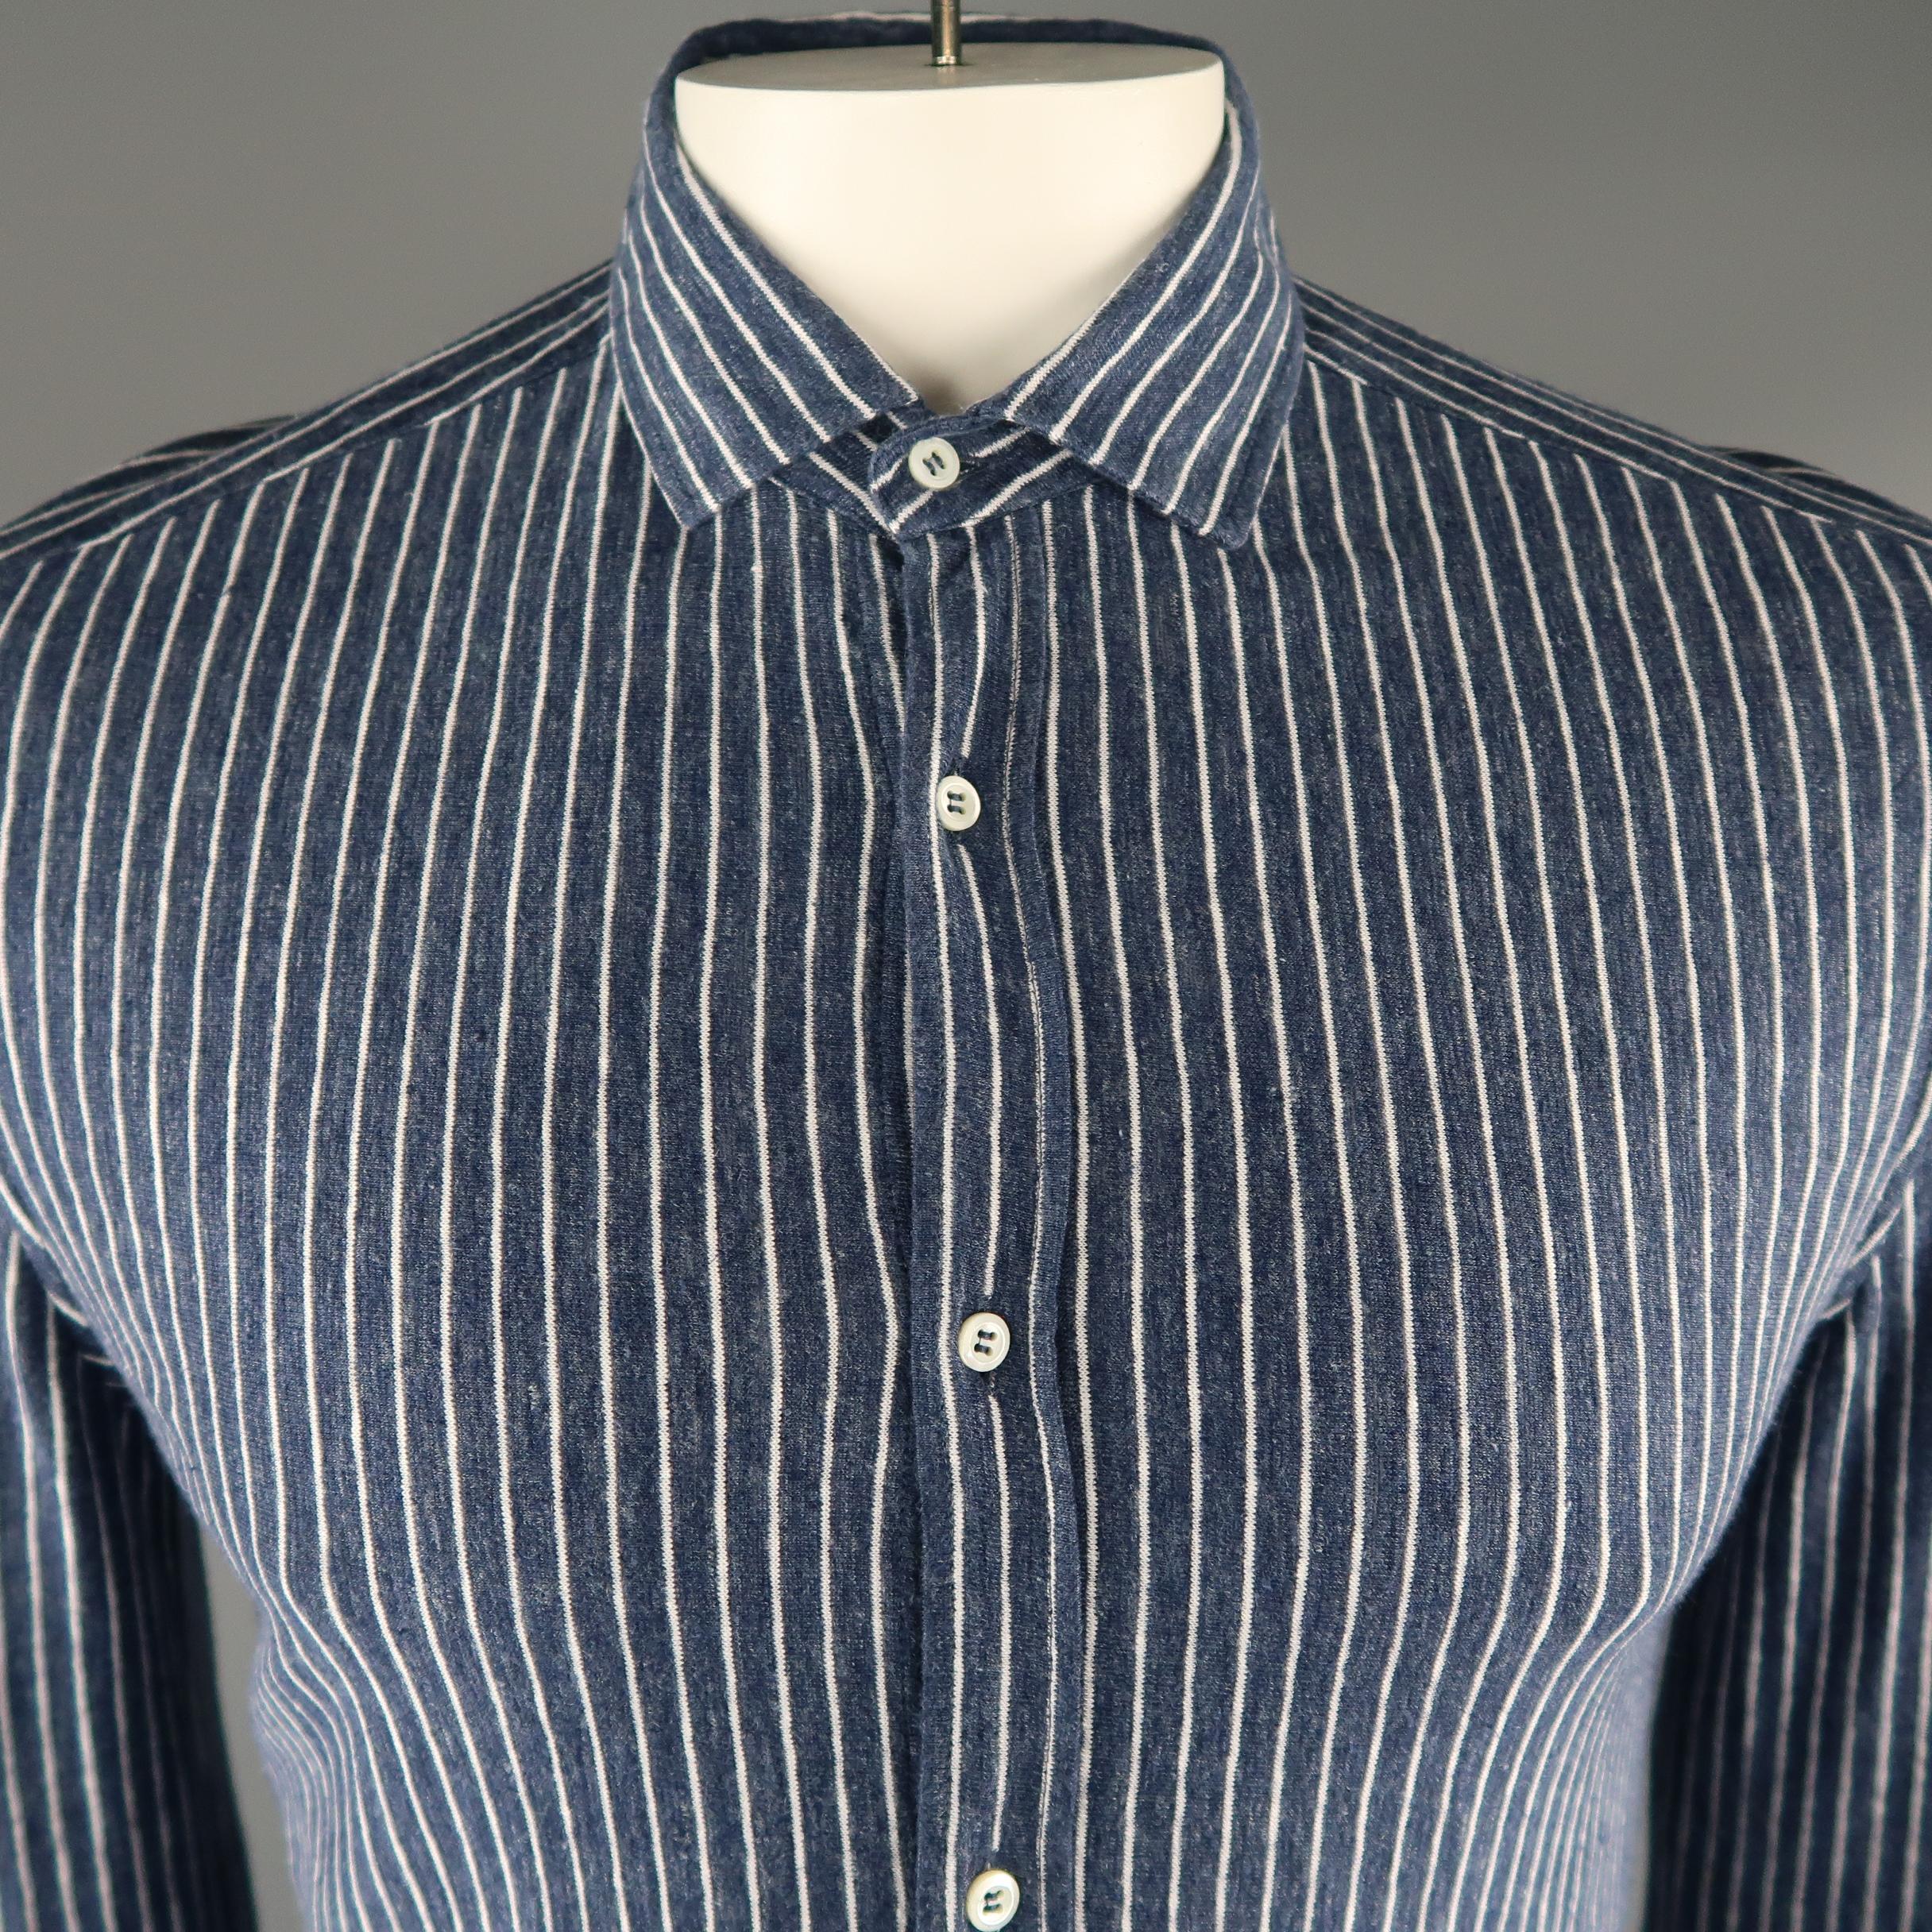 BRUNELLO CUCINELLI long sleeve shirt comes in navy and white striped linen blend, button-up. 

Made in Italy. 
Excellent Pre-Owned Condition.
Marked: L
 
Measurements:
 
Shoulder: 17.5 in.
Chest: 44 in.
Sleeve: 30 in.
Length: 30 in.